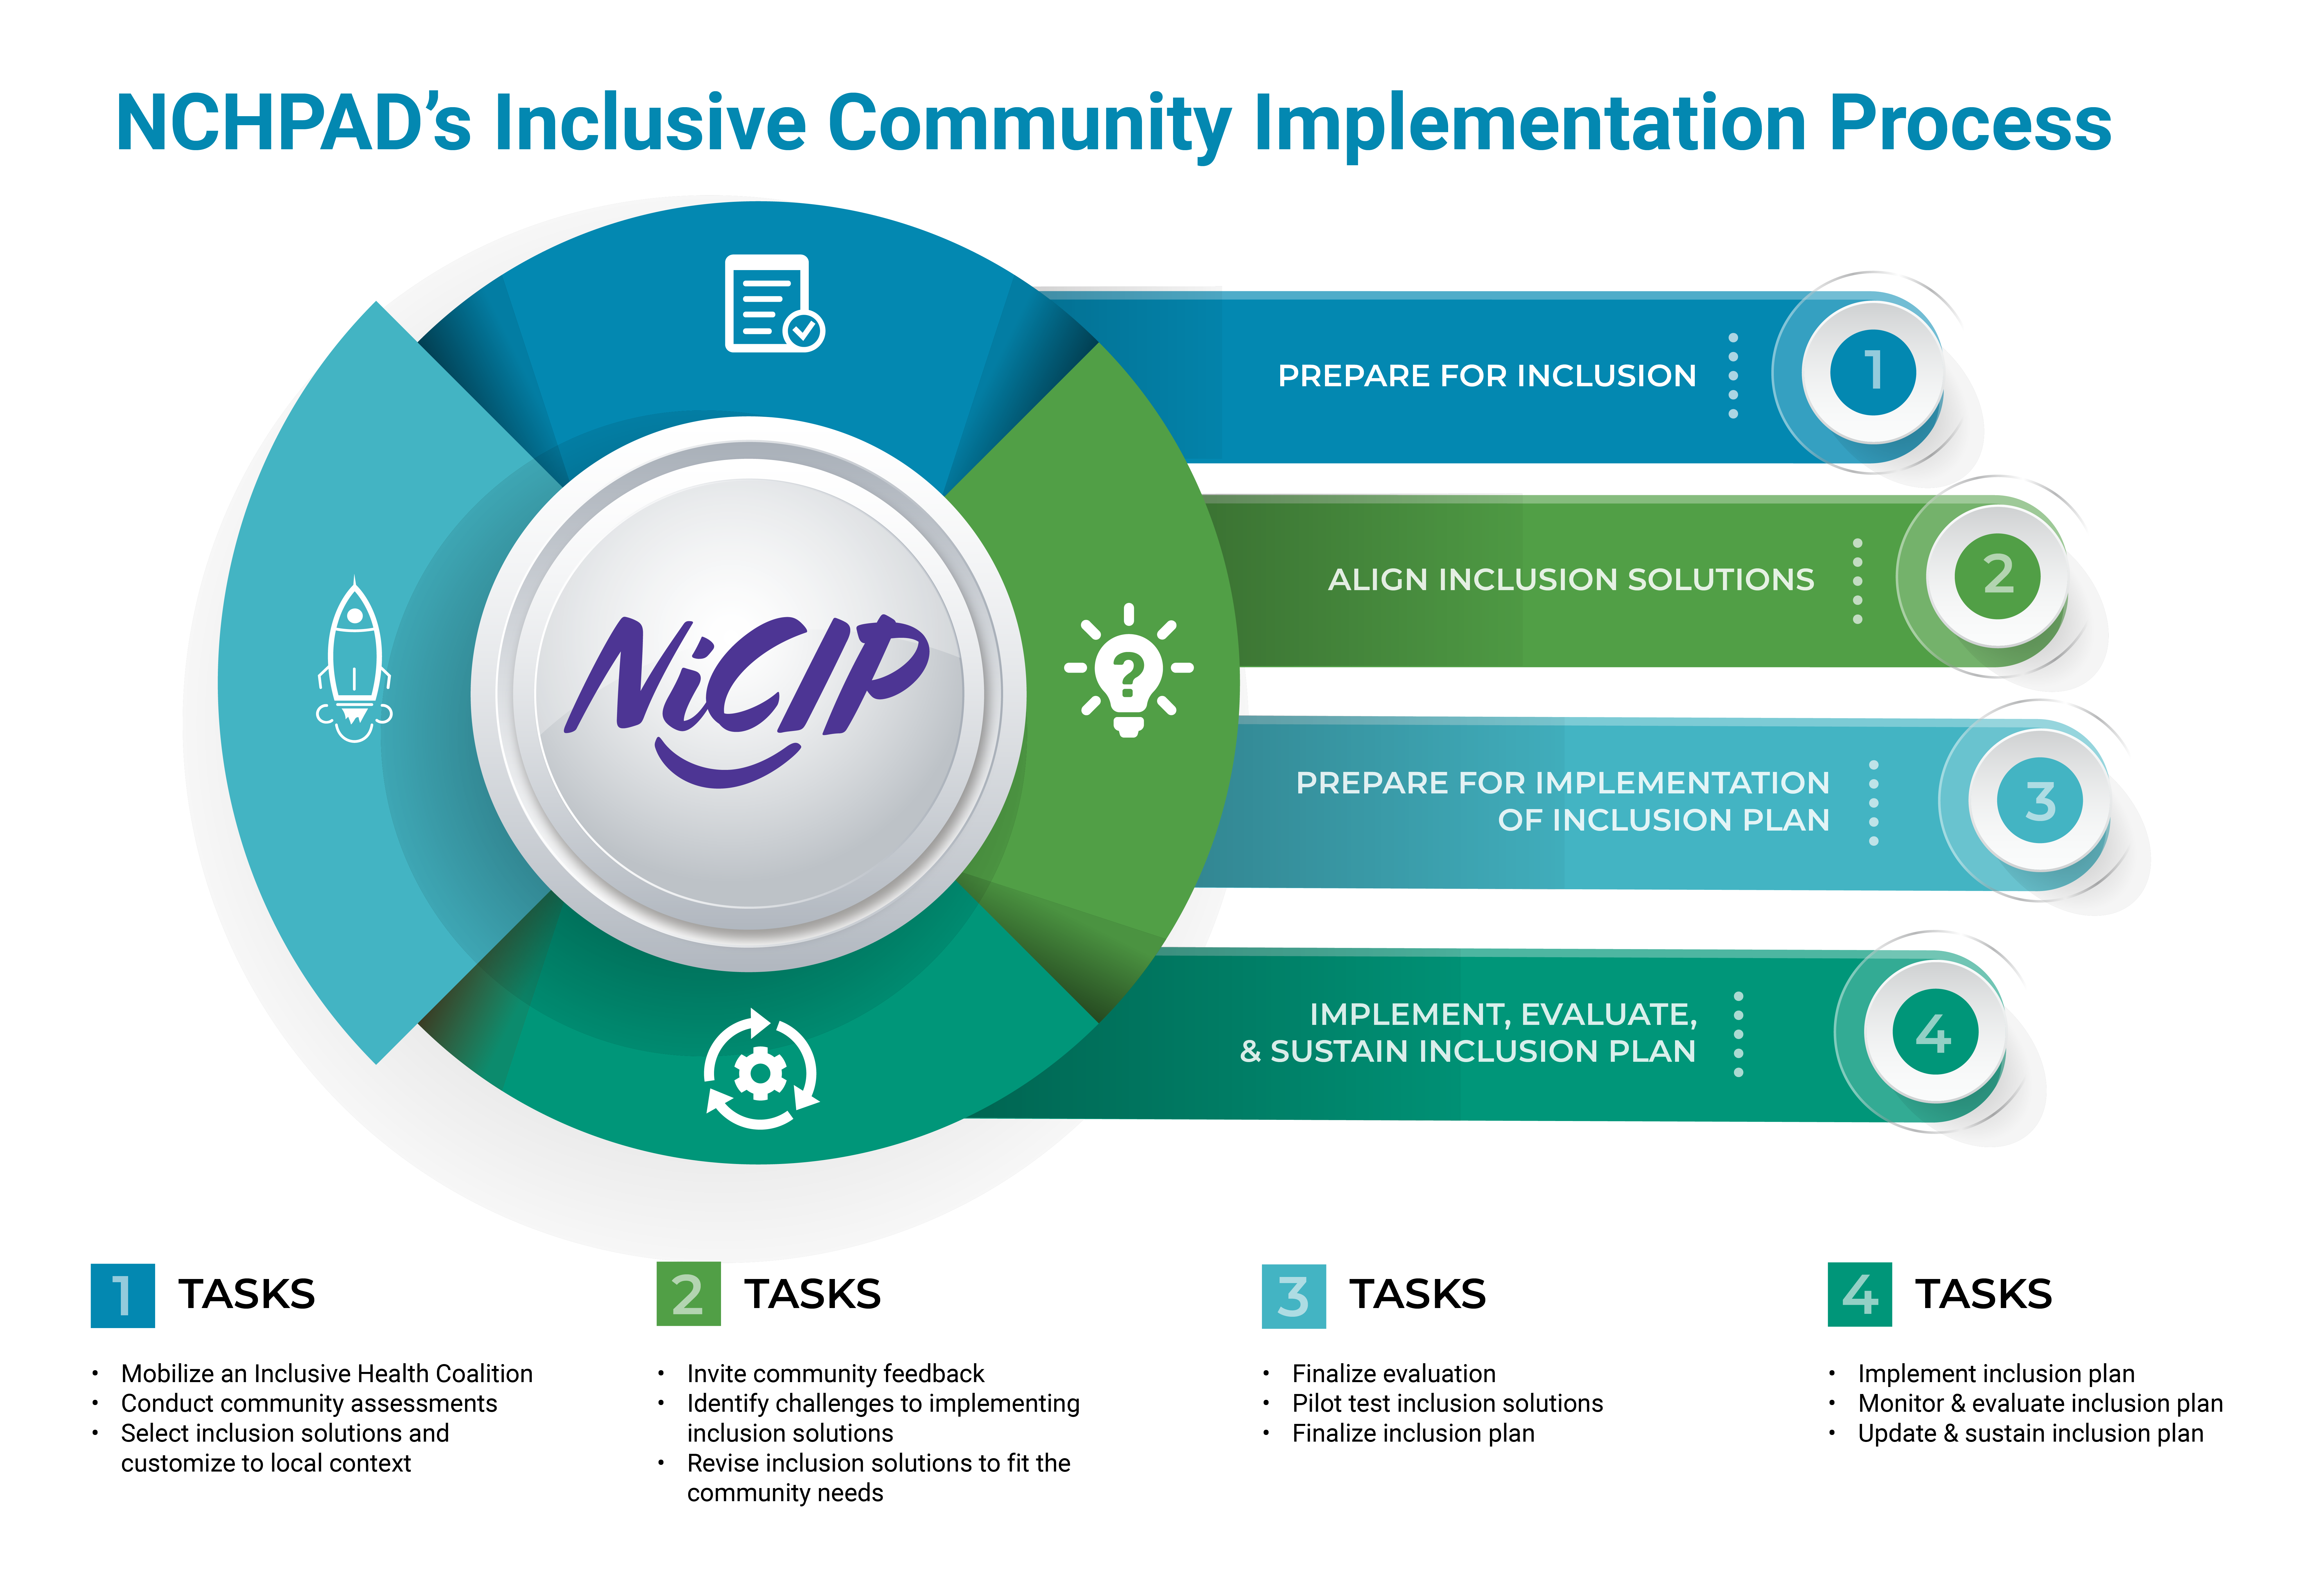 Implementation plan. Innovative approaches. Inclusive Internet Index.